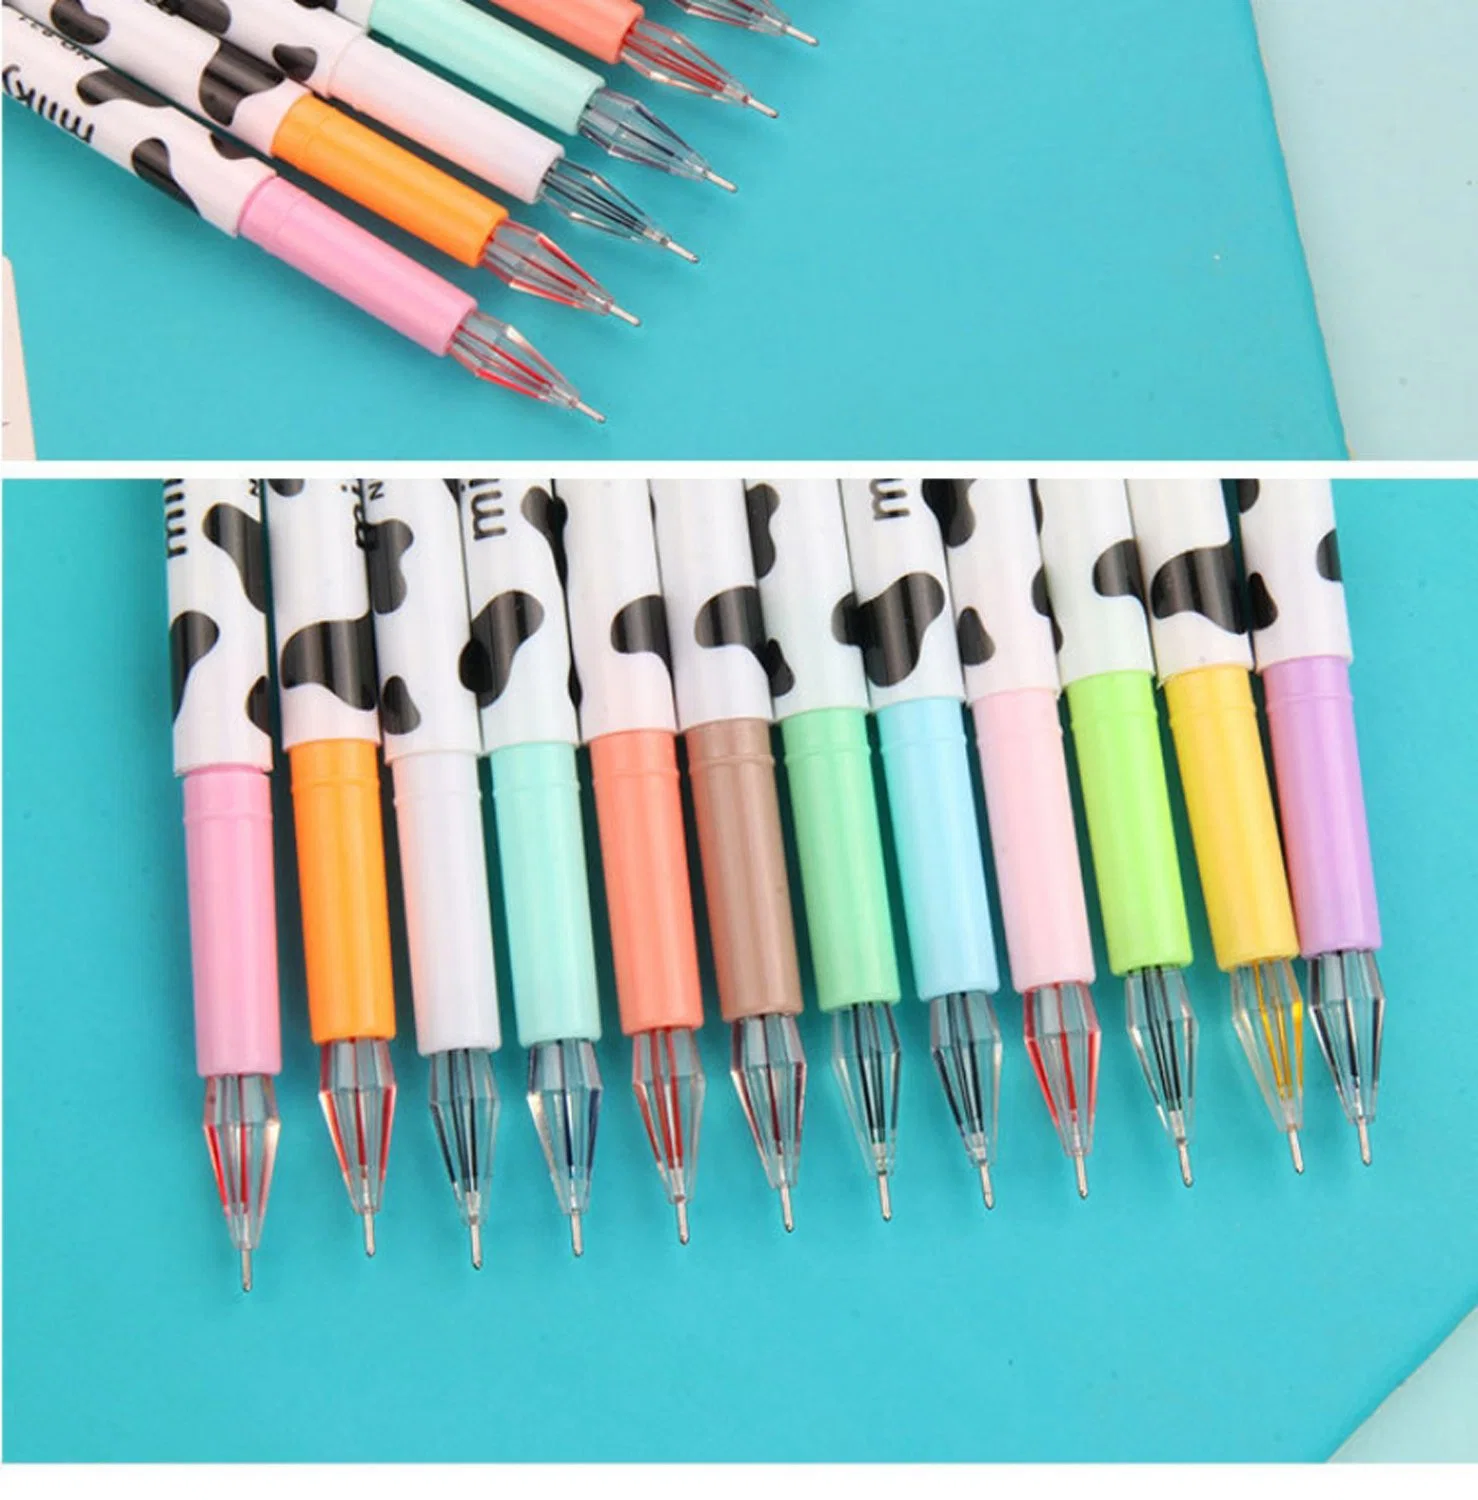 Colorful Cute Diamond Gel Pen Candy Color Milky Cow Pens Set Writing Kawaii Stationery School Office Supplies Set of 12 Colors School Stationery Set